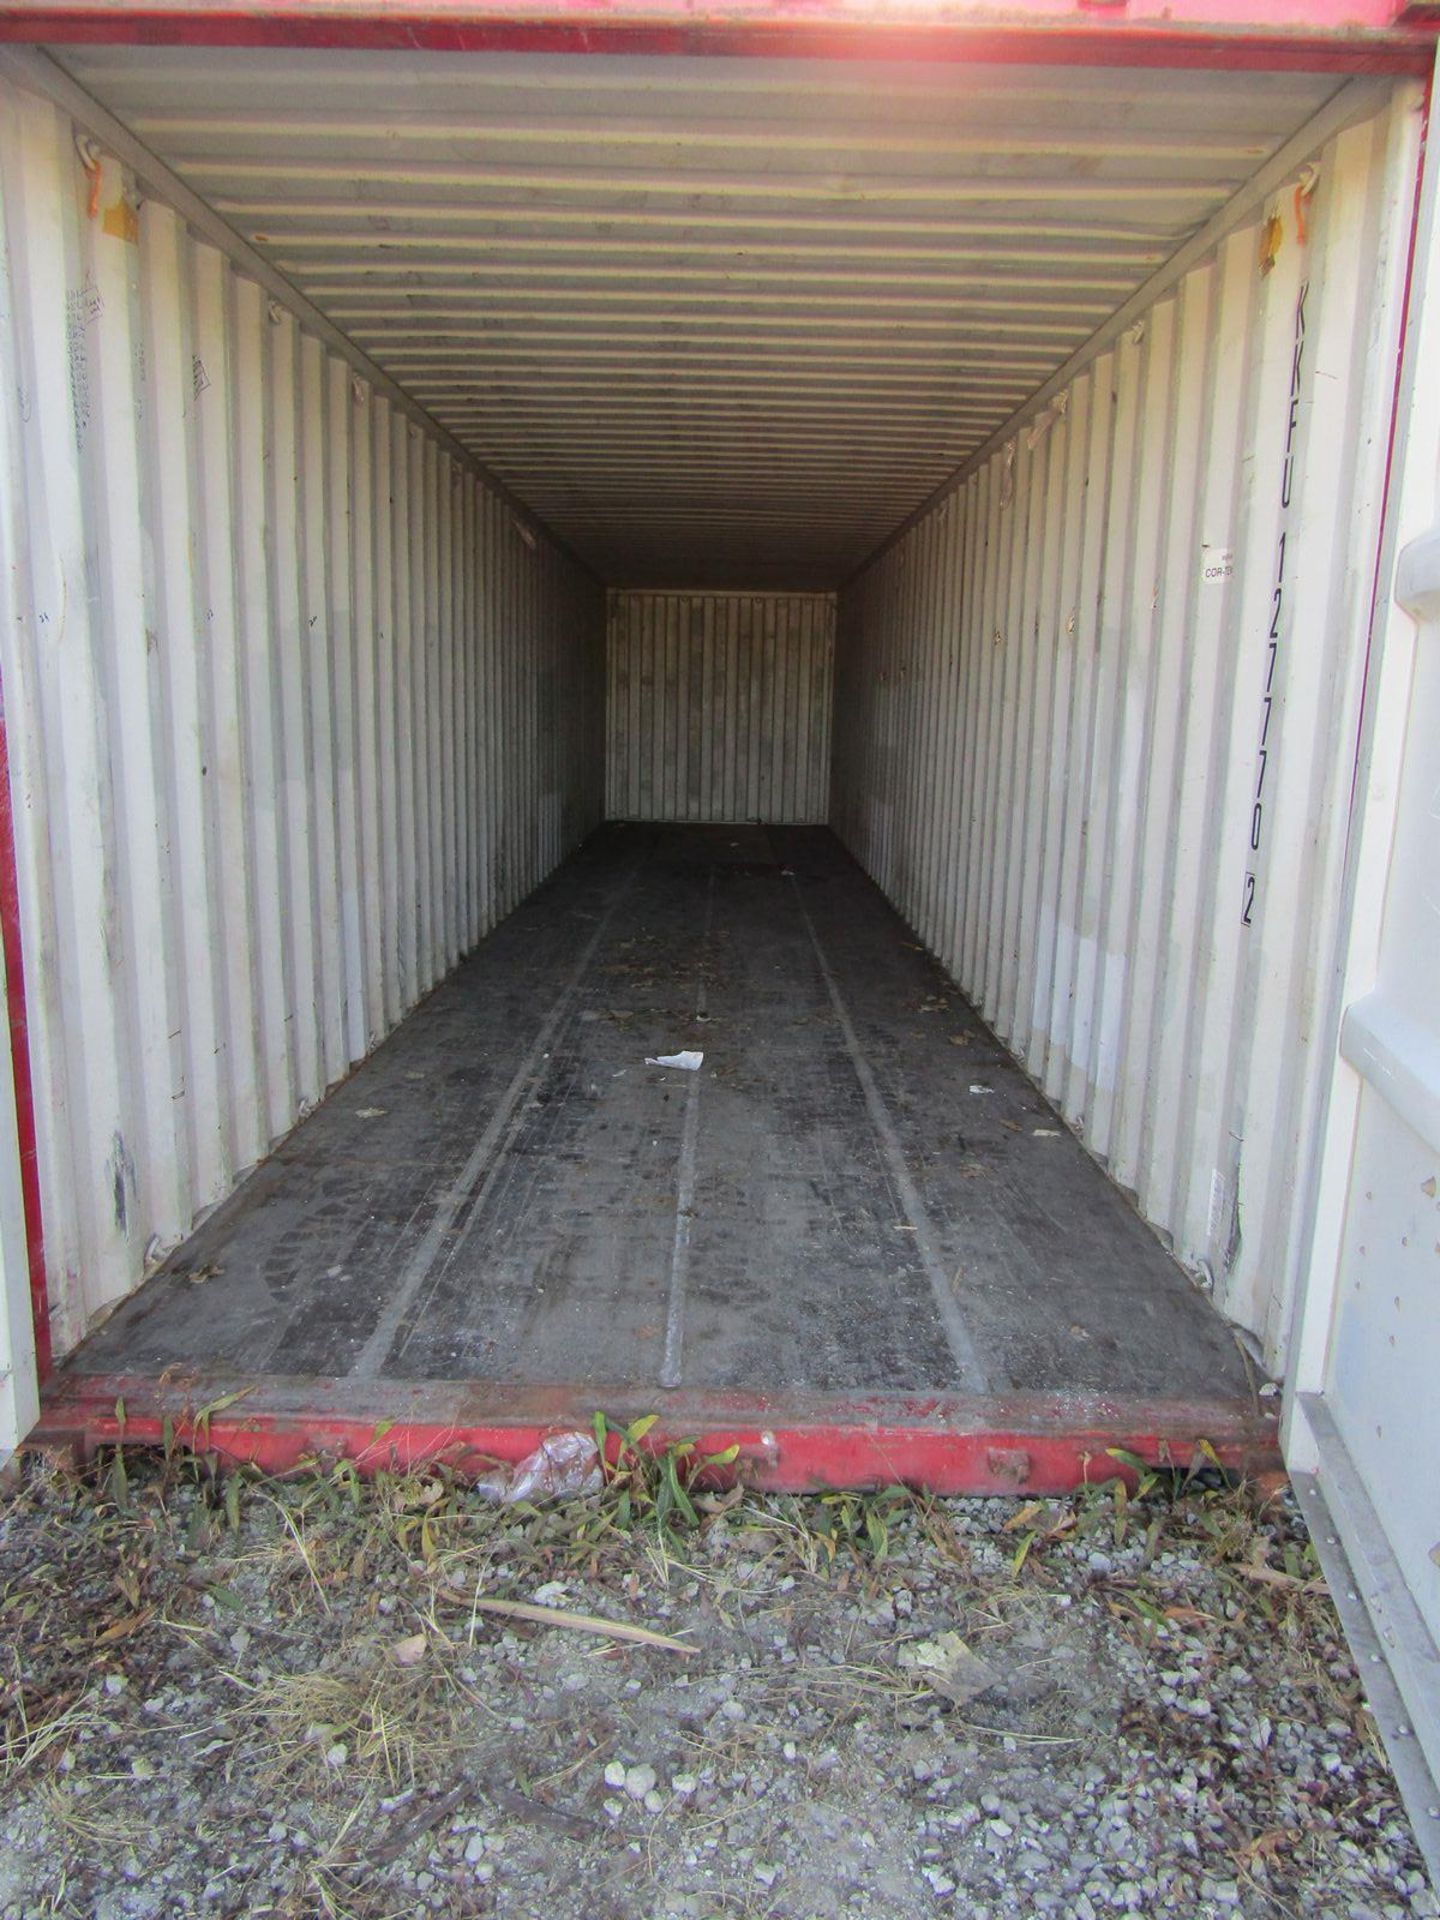 Jindo 40 ft. Model JS-DY4KL-C Shipping Container, S/N: GJ02-19335 (2002); Approved for Transport - Image 2 of 3